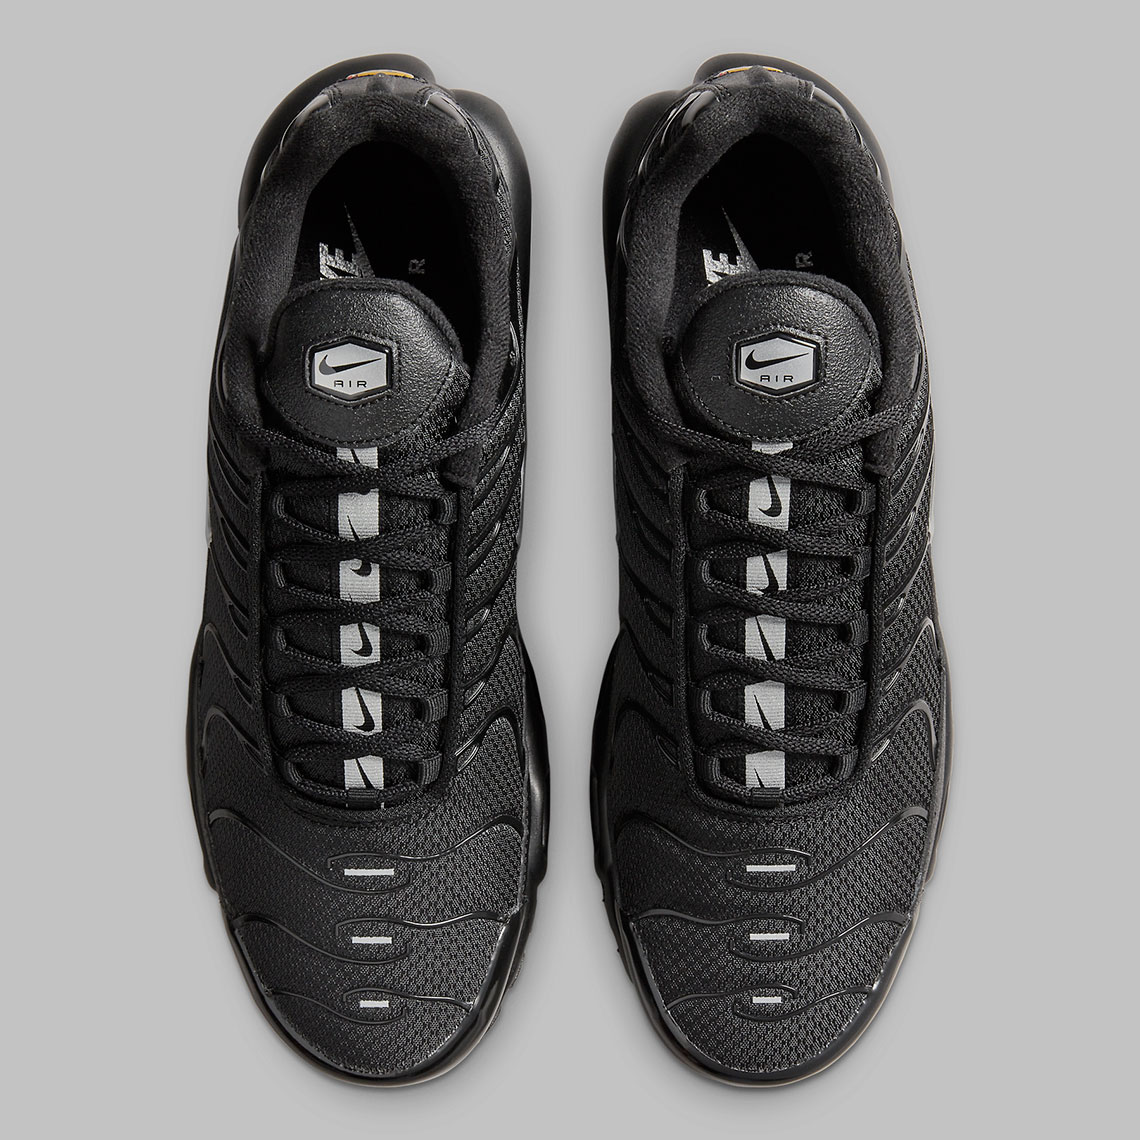 Nike Air Max Plus Black Silver Dx8971 001 Release Date 7